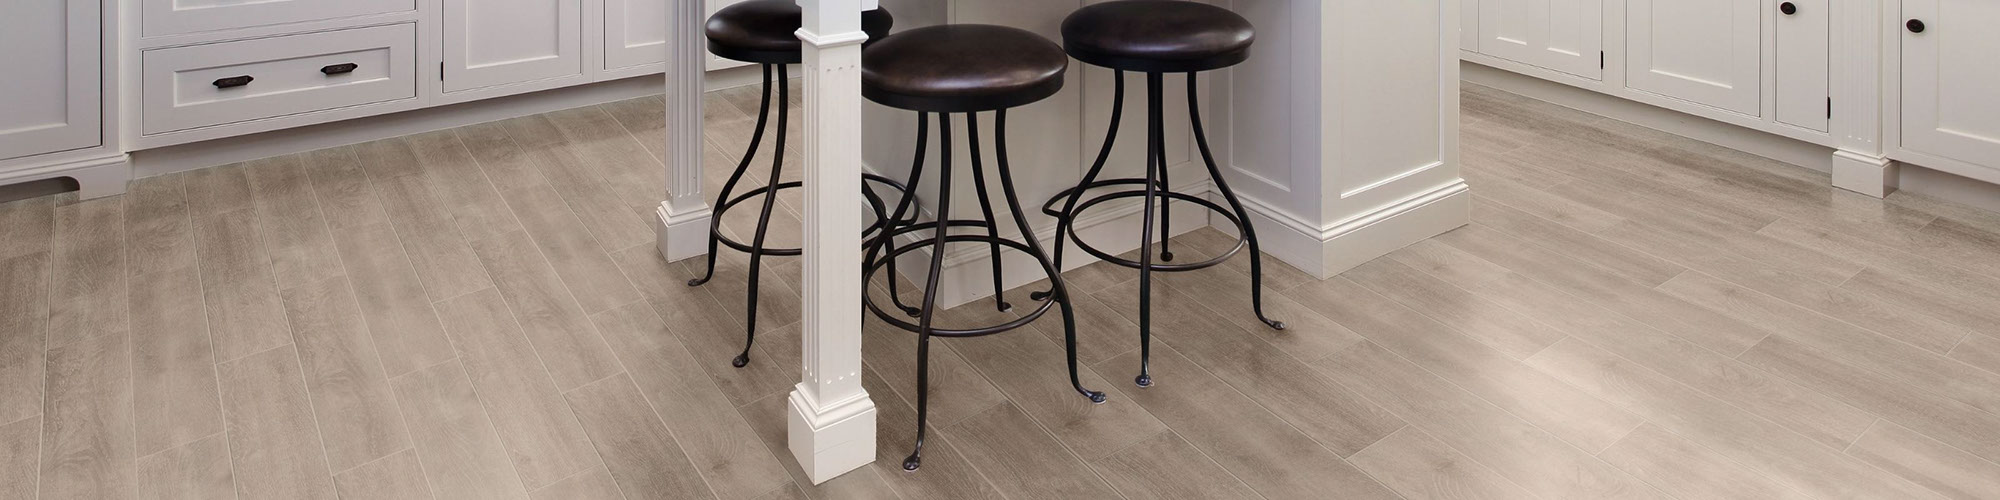 Eat-in kitchen with island with white base, floor tile that looks like blonde wood flooring, brown leather & black metal bar stools.